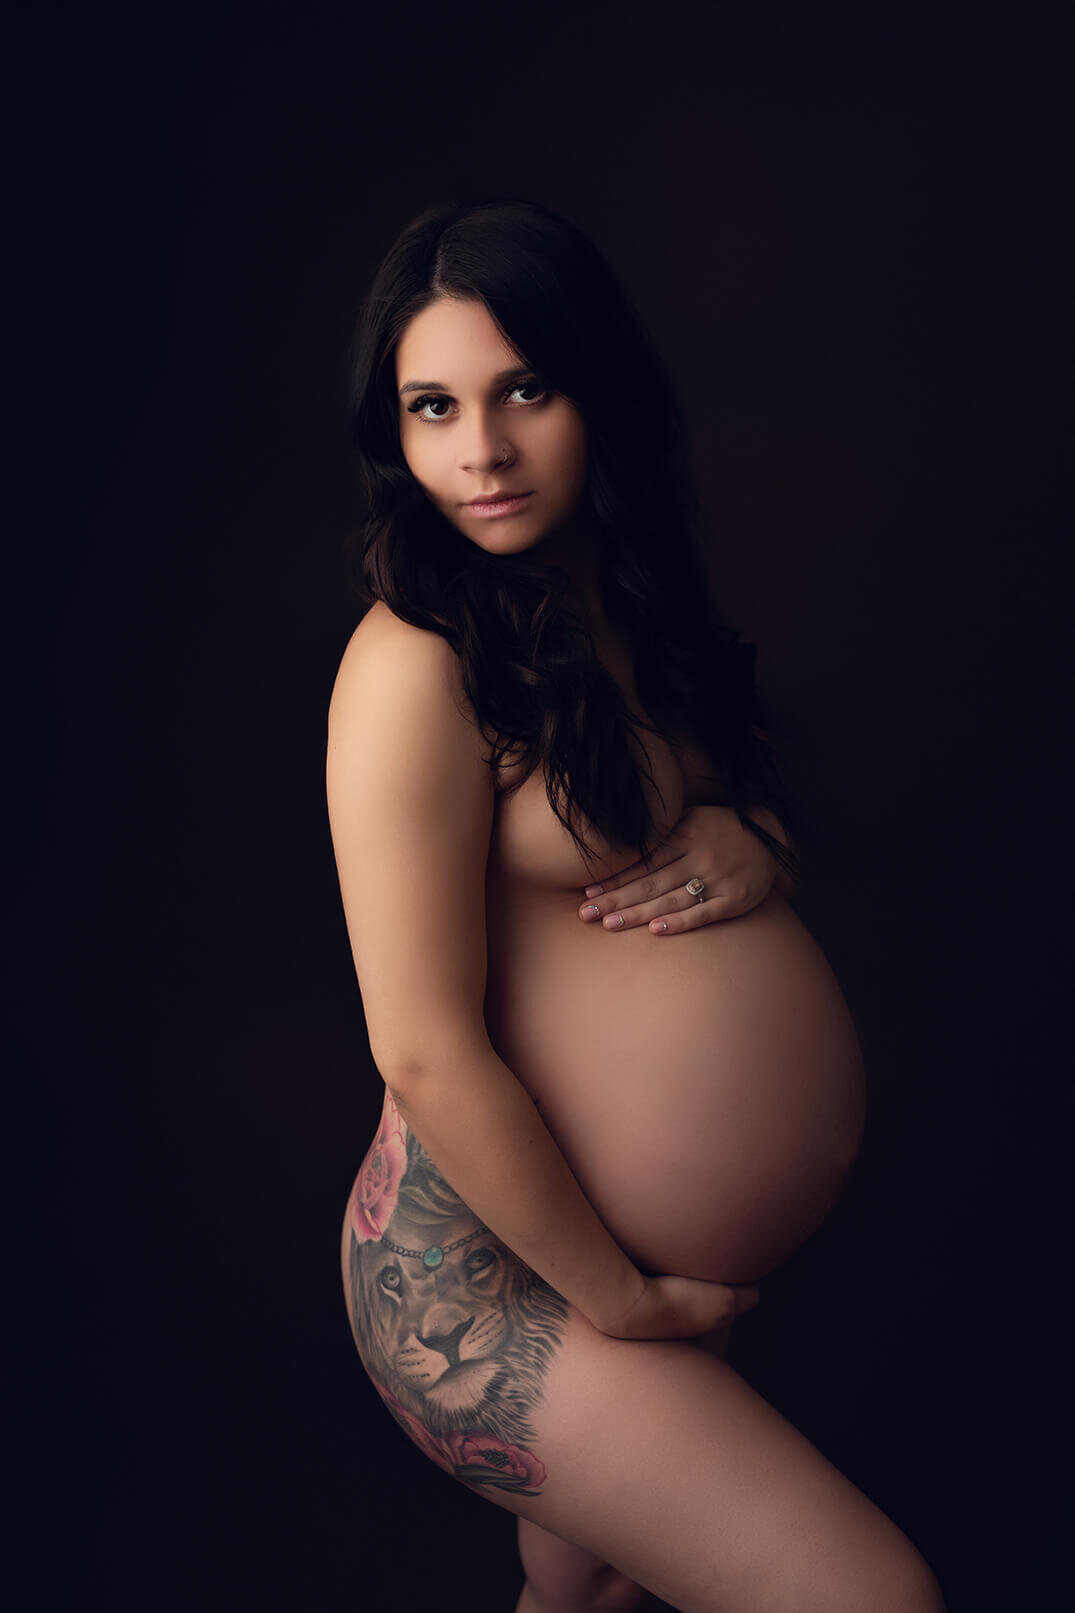 Completely nude pregnant woman holding bump